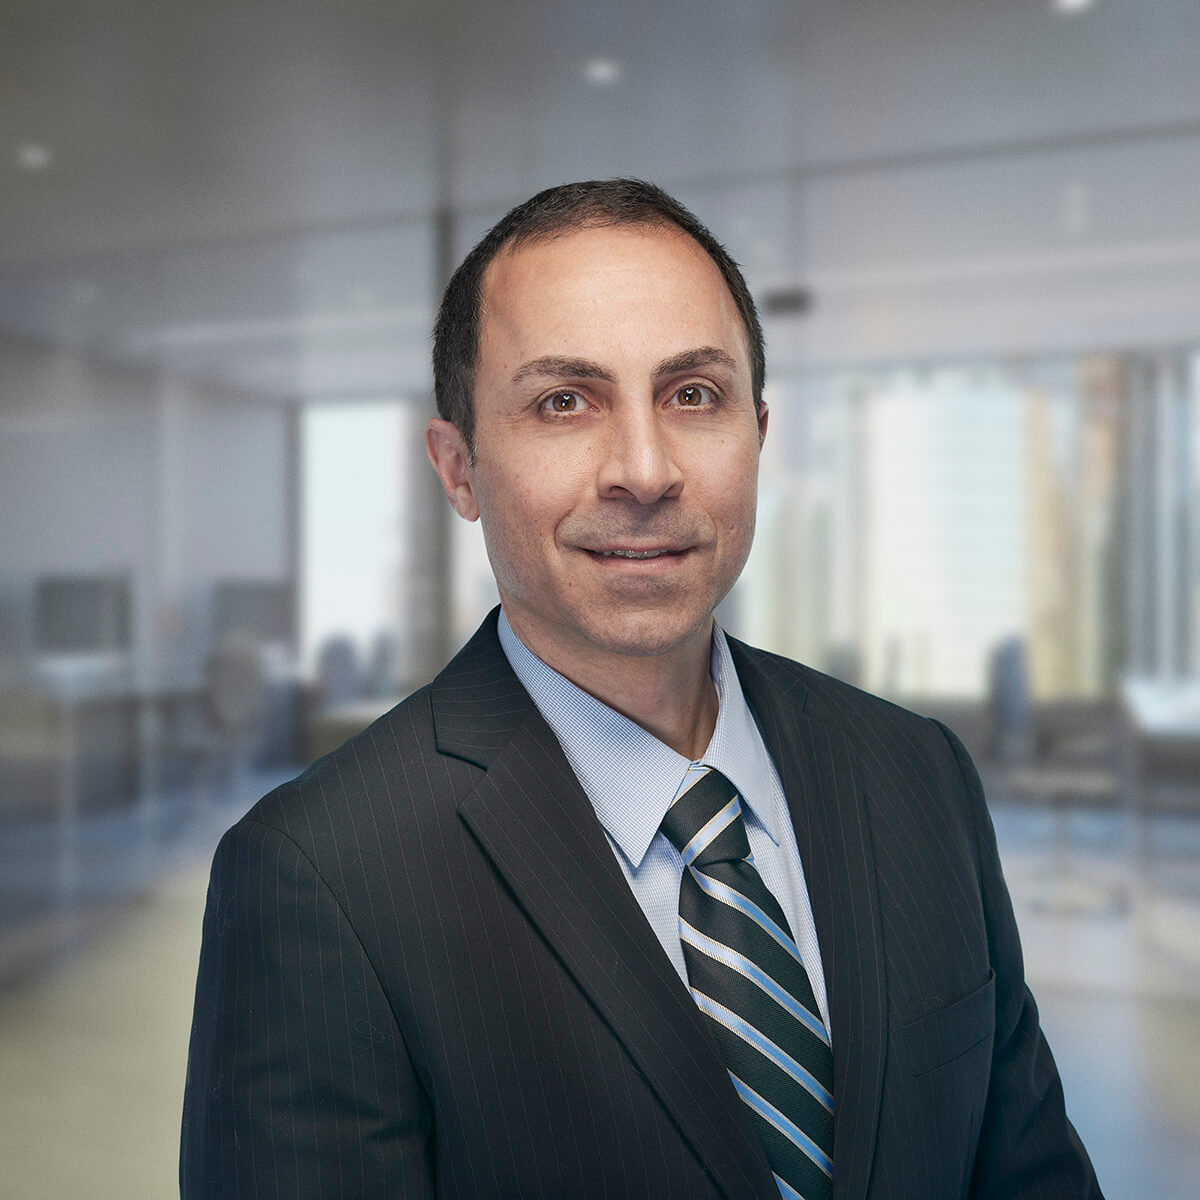 An image of Ryan Kattoo, a principal and co-founder of Keystone Commercial Real Estate. Property Manager.